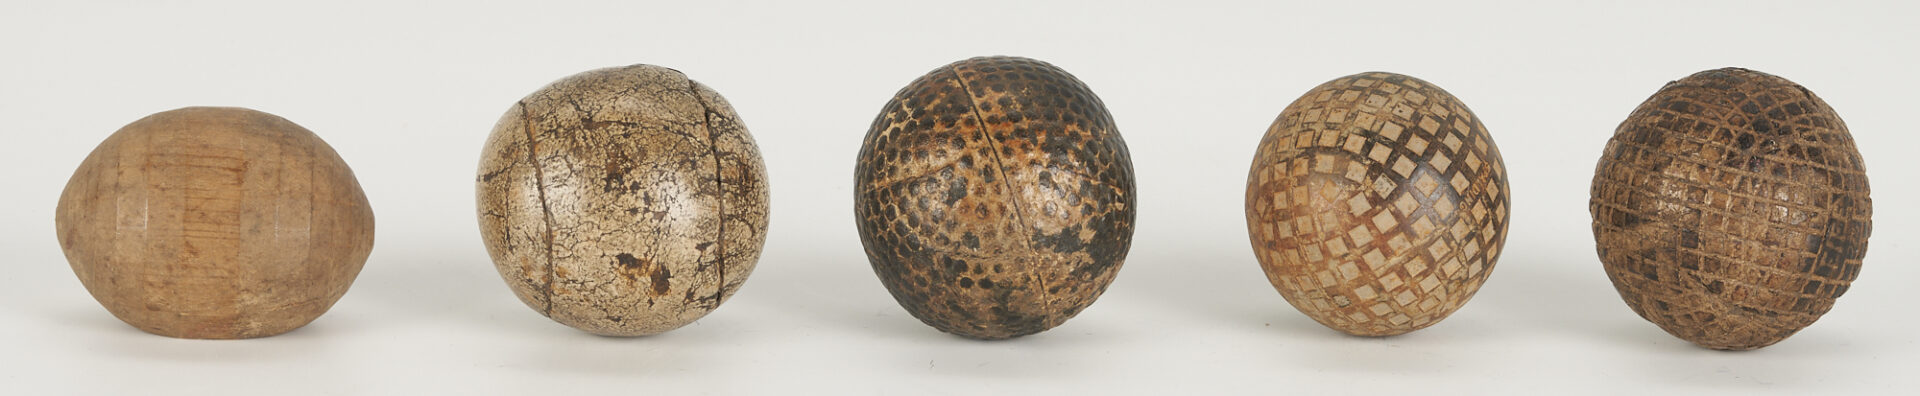 Lot 628: Collection of 5 Antique Golf / Chole Balls, 3 Stands